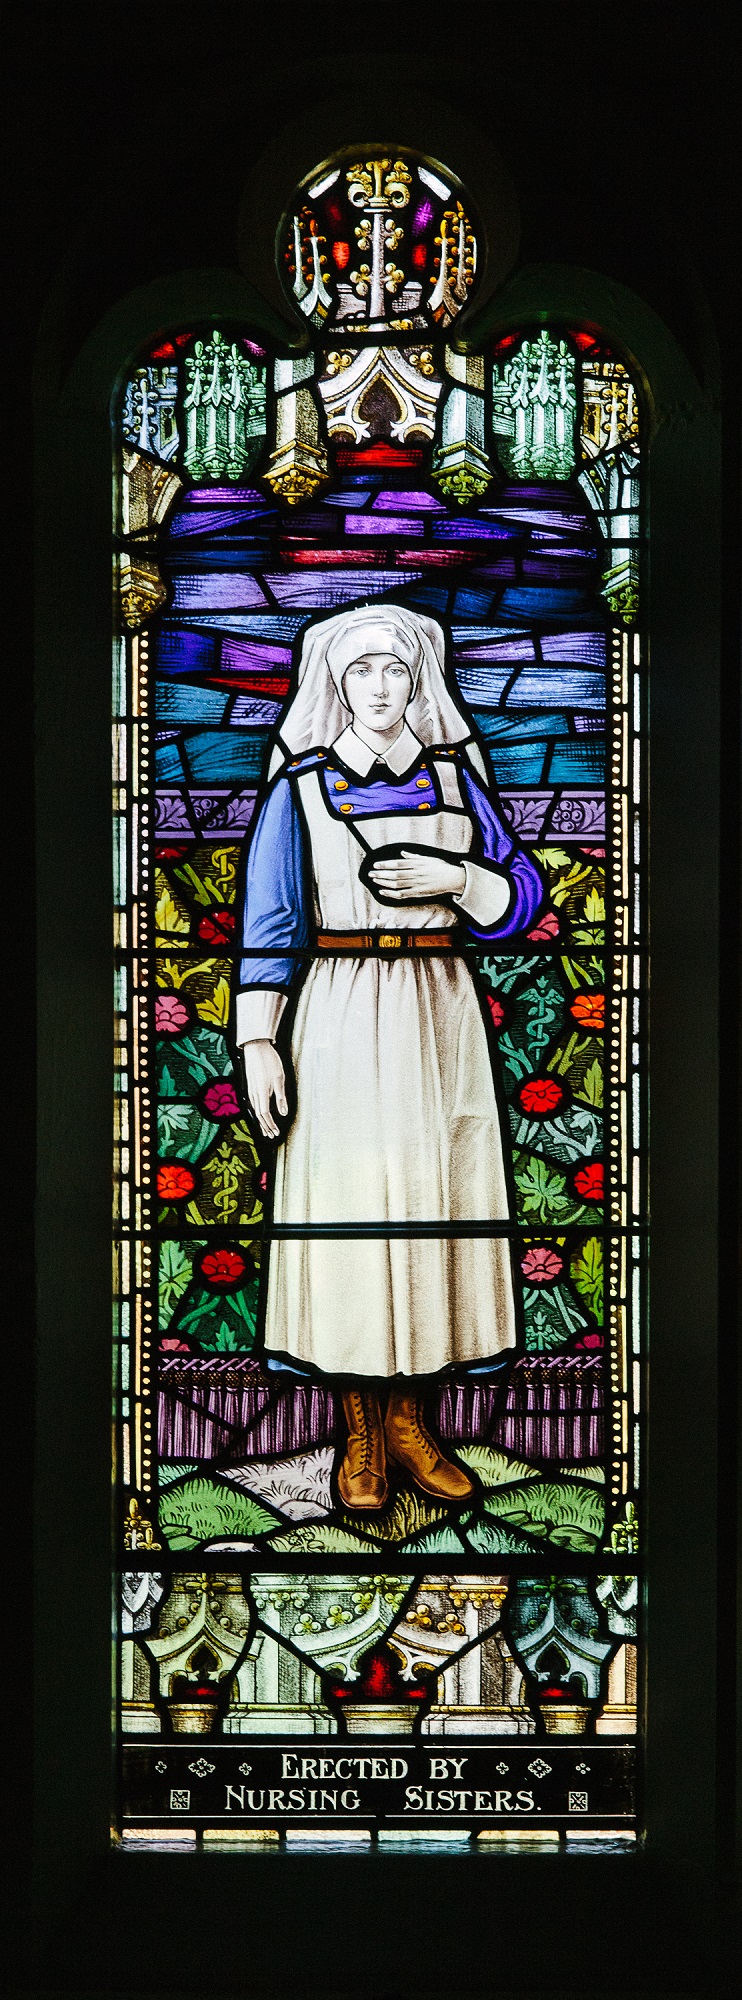 The Nurse stained glass window